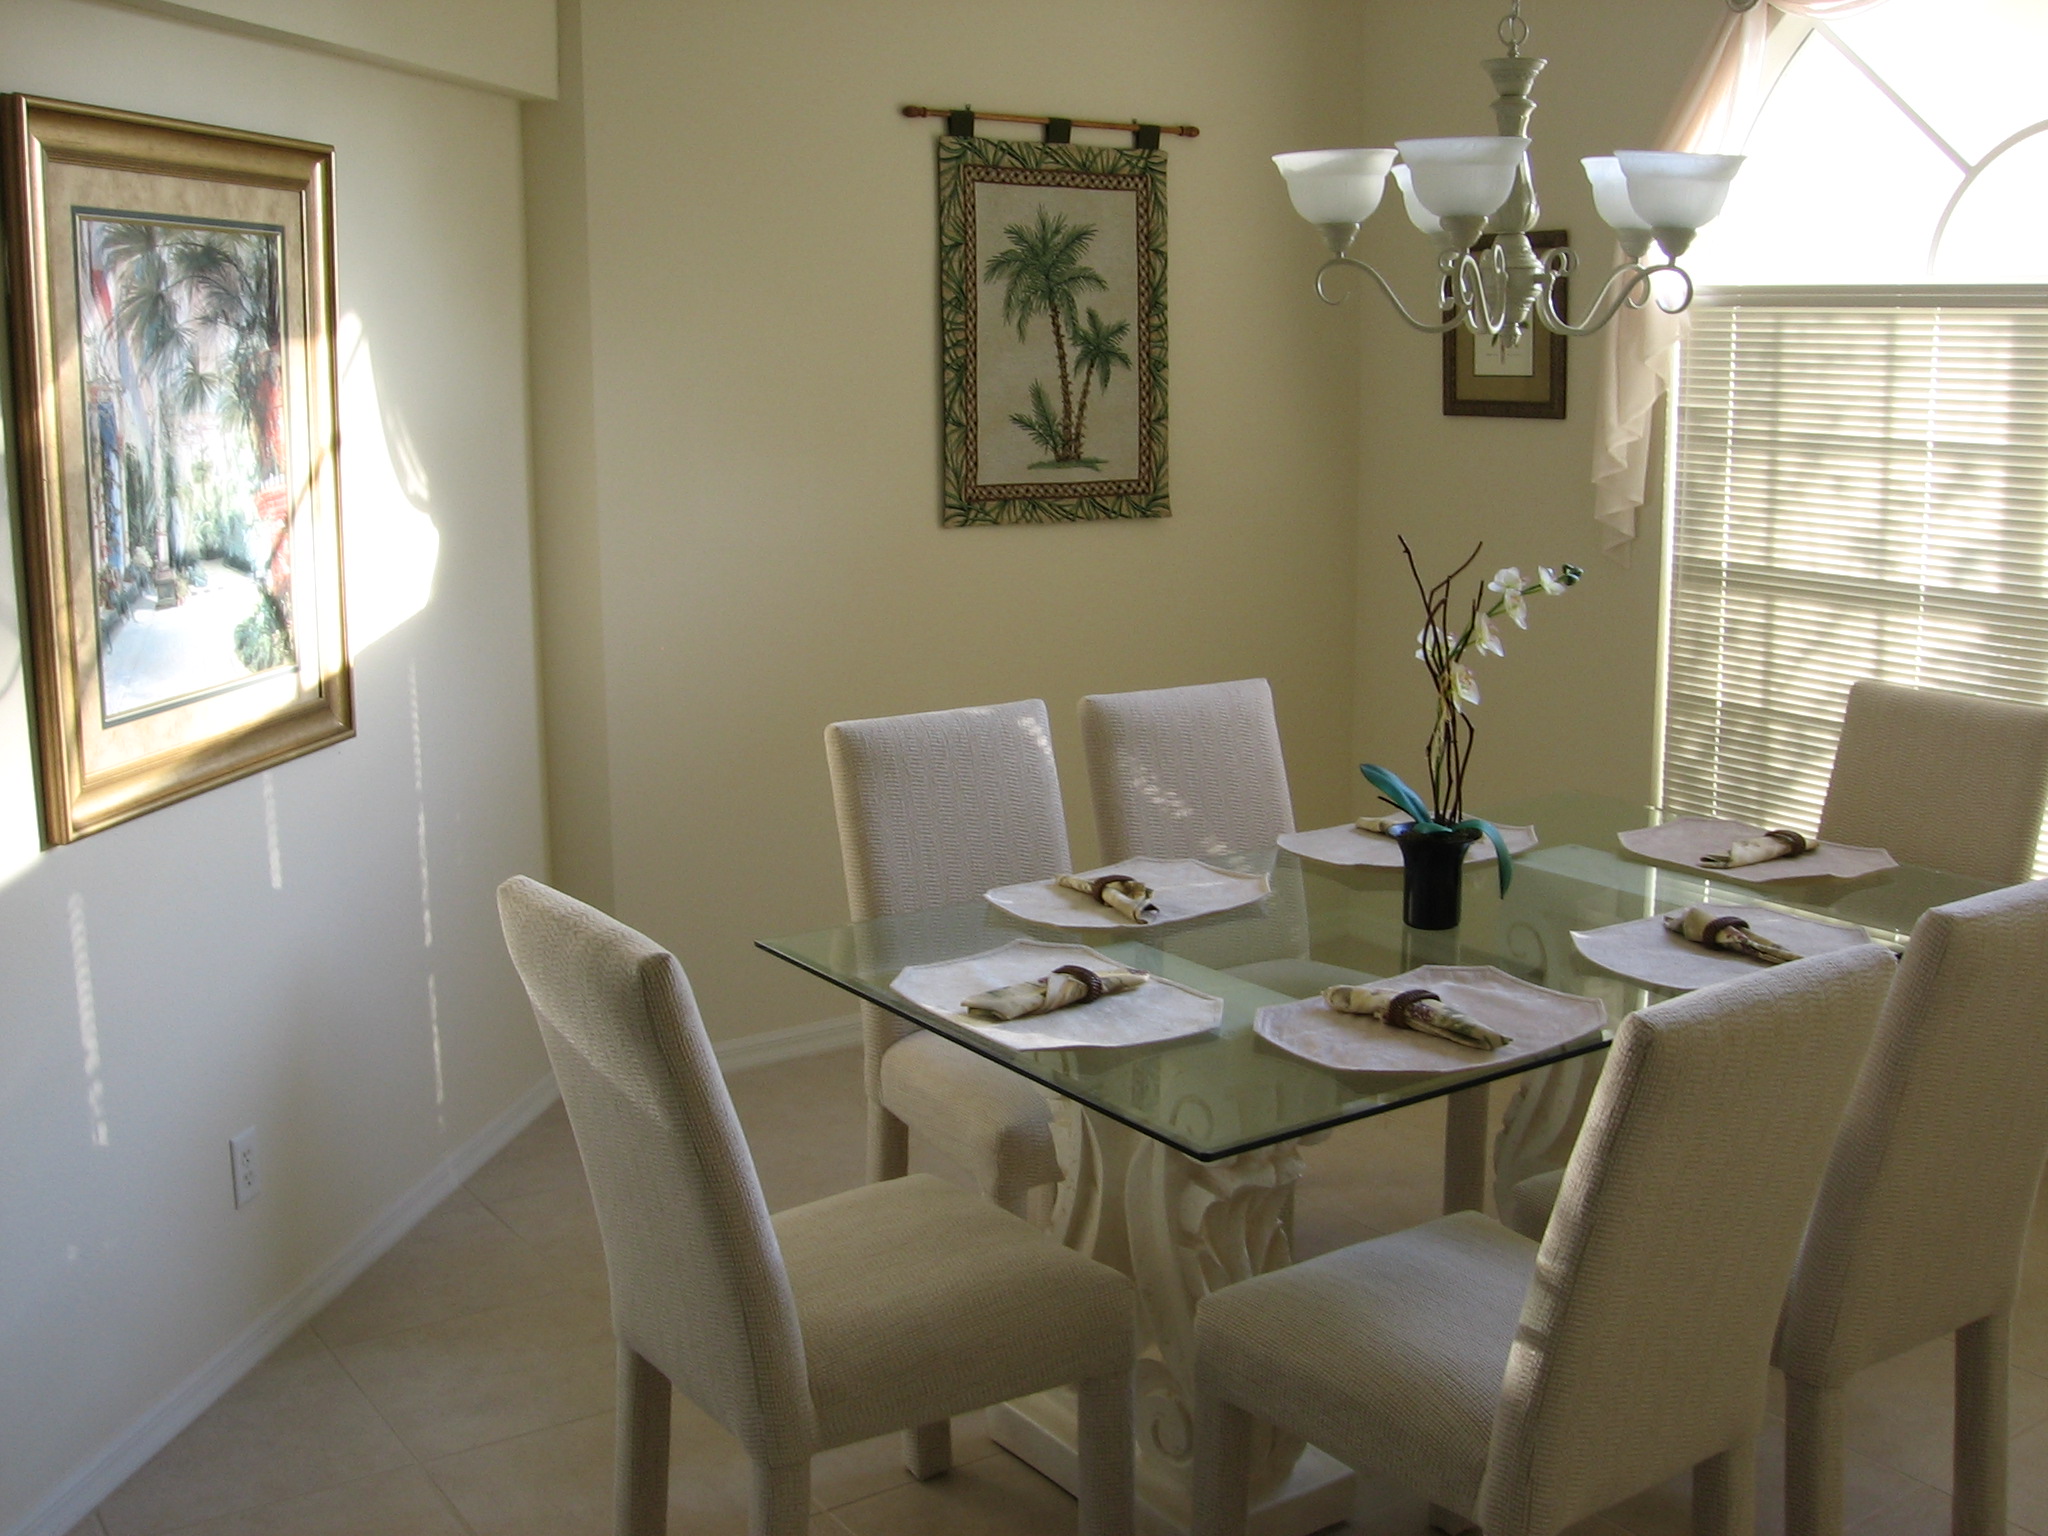 Dining area - not that it's ever cold enough to eat indoors!